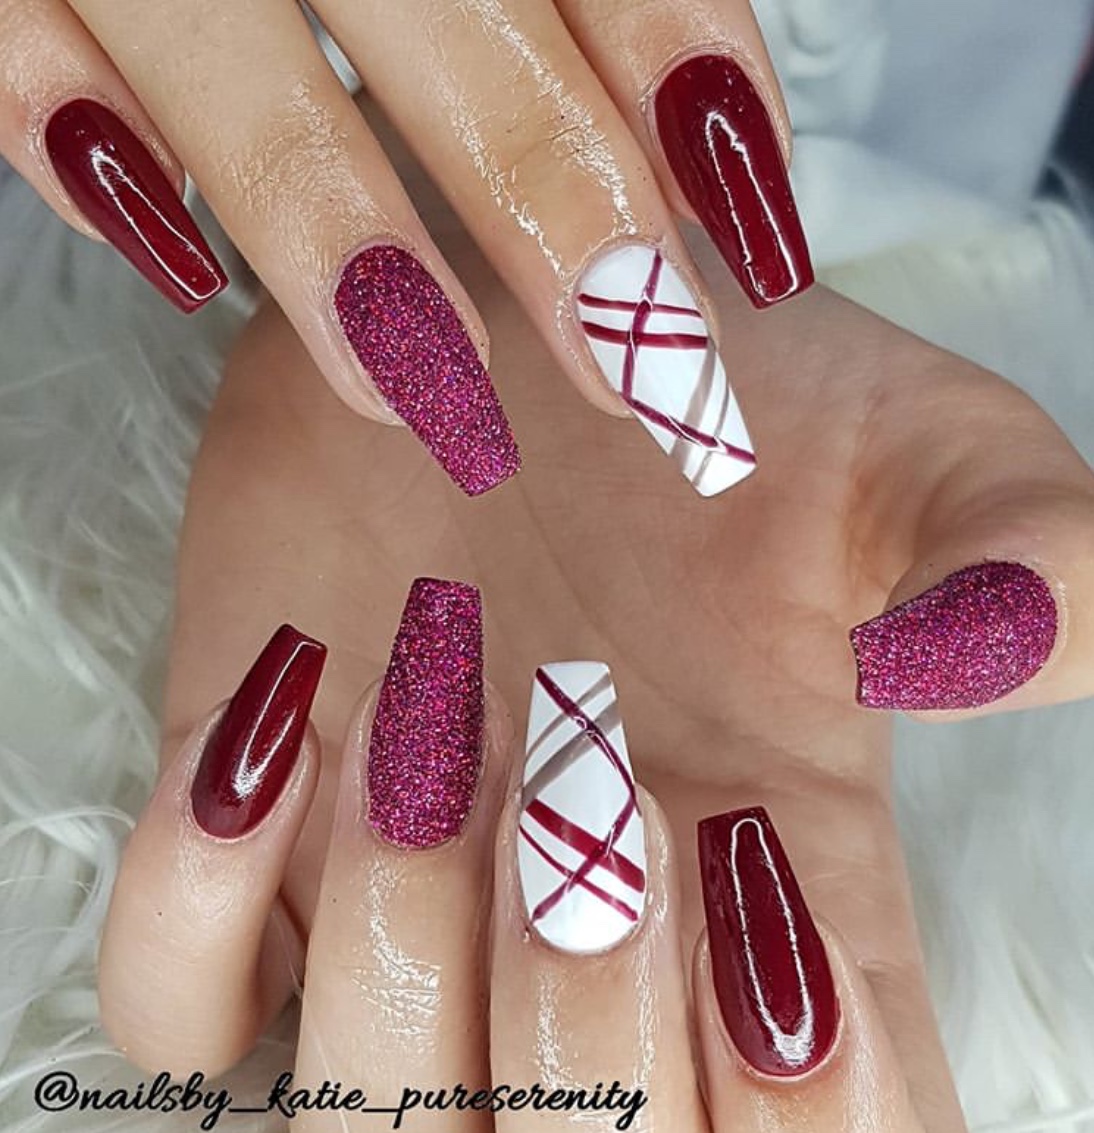 Burgundy Nails 45 Nail Designs For Different Shapes  Shopping Ideas